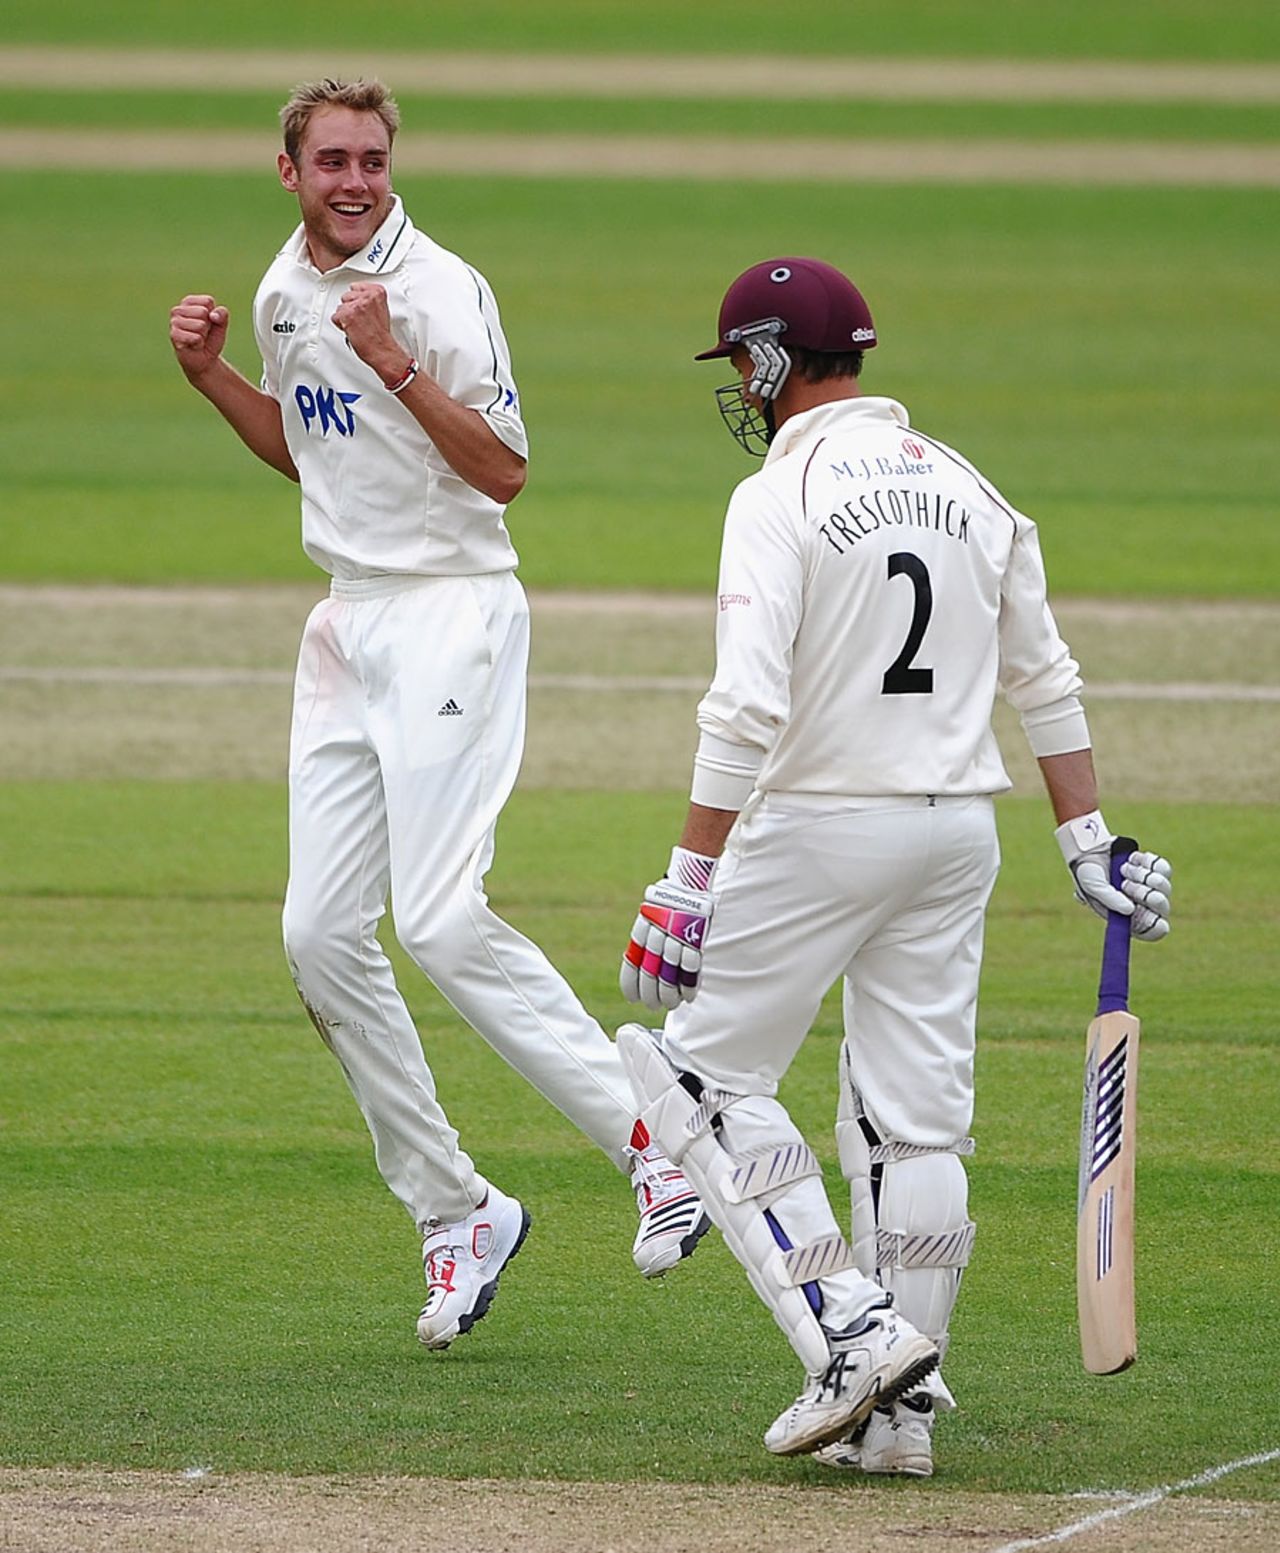 Stuart Broad claimed the big wicket of Marcus Trescothick, Nottinghamshire v Somerset, County Championship, Division One, Trent Bridge, July 13, 2011